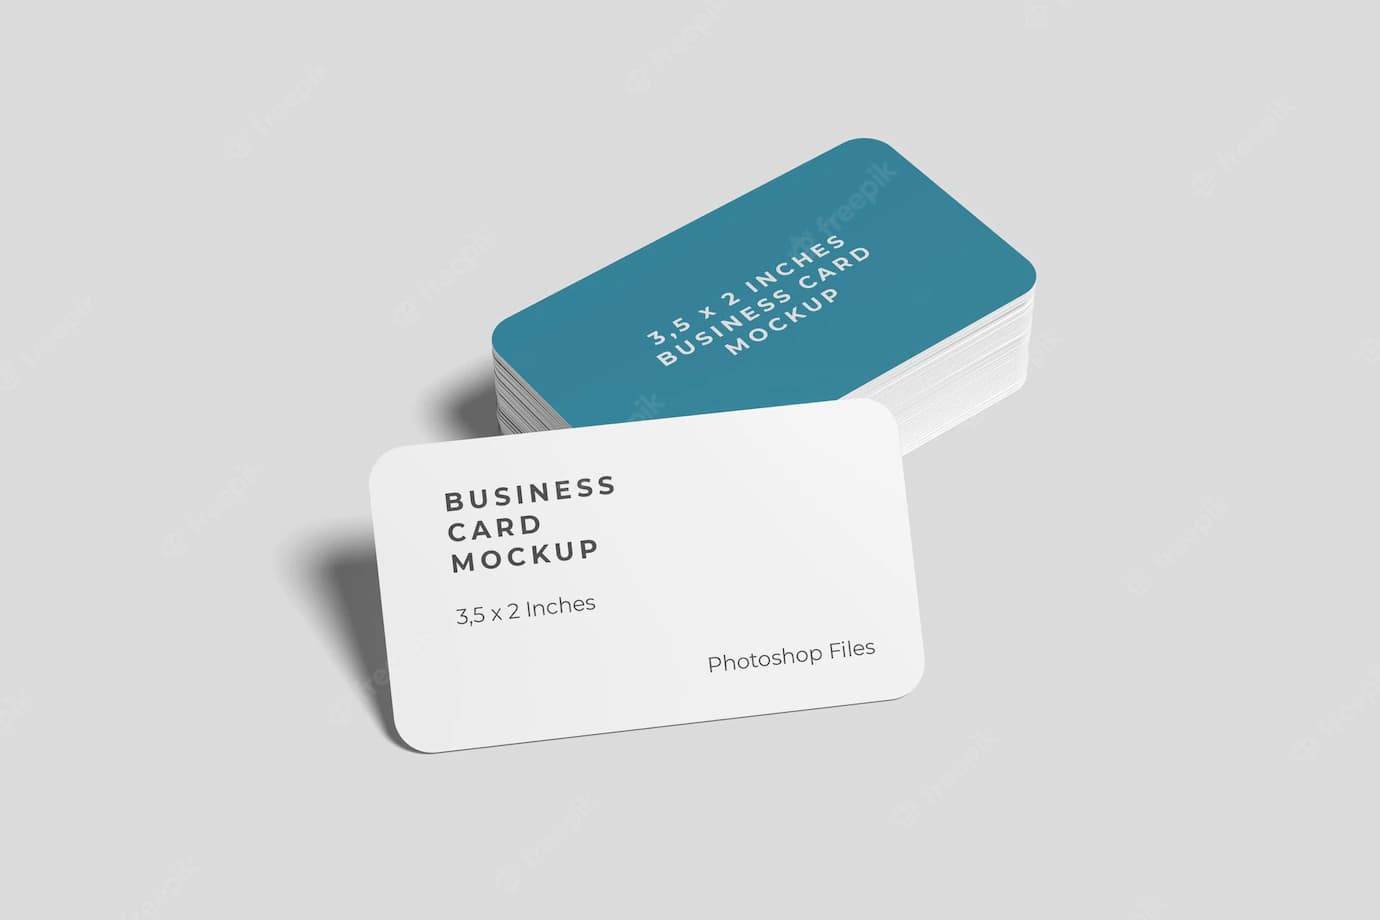 rounded business card stack mockups 7838 425